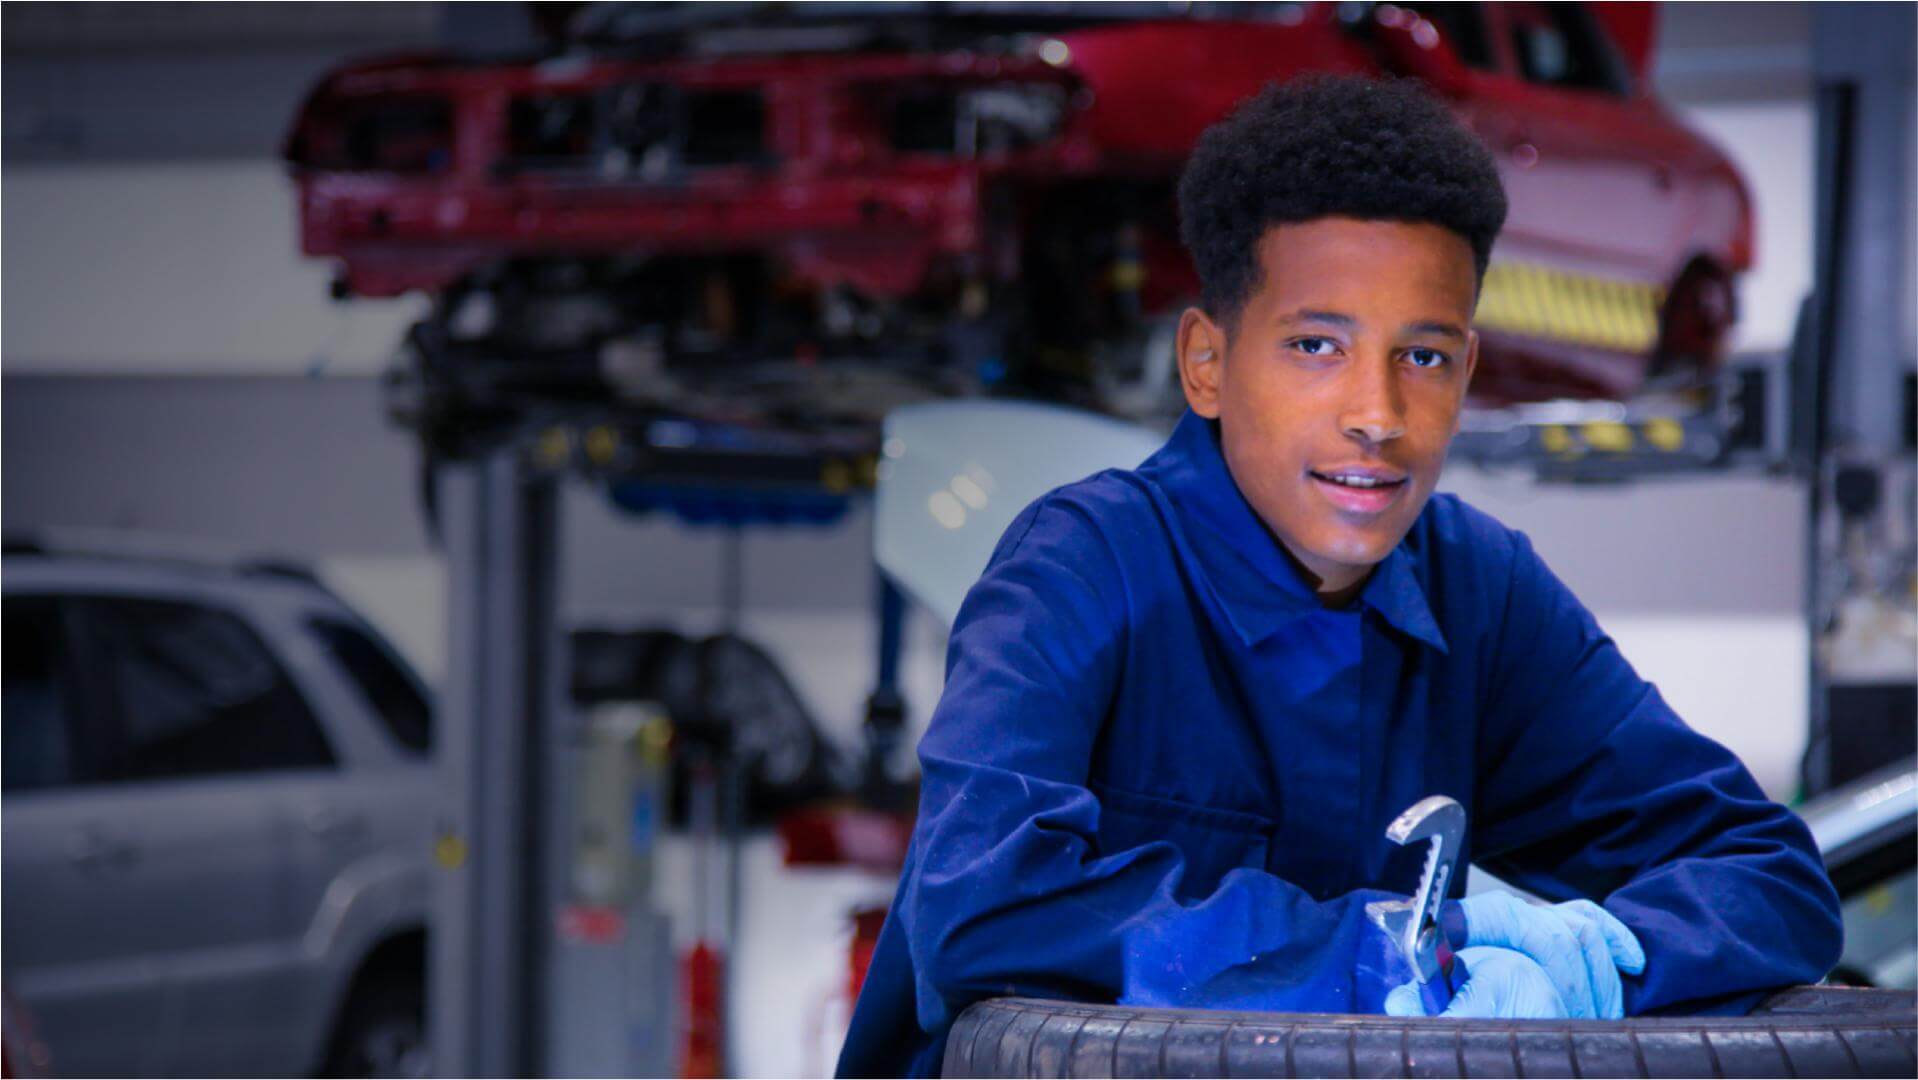 Engineering student wearing blue overalls holding a wrench looking at the camera